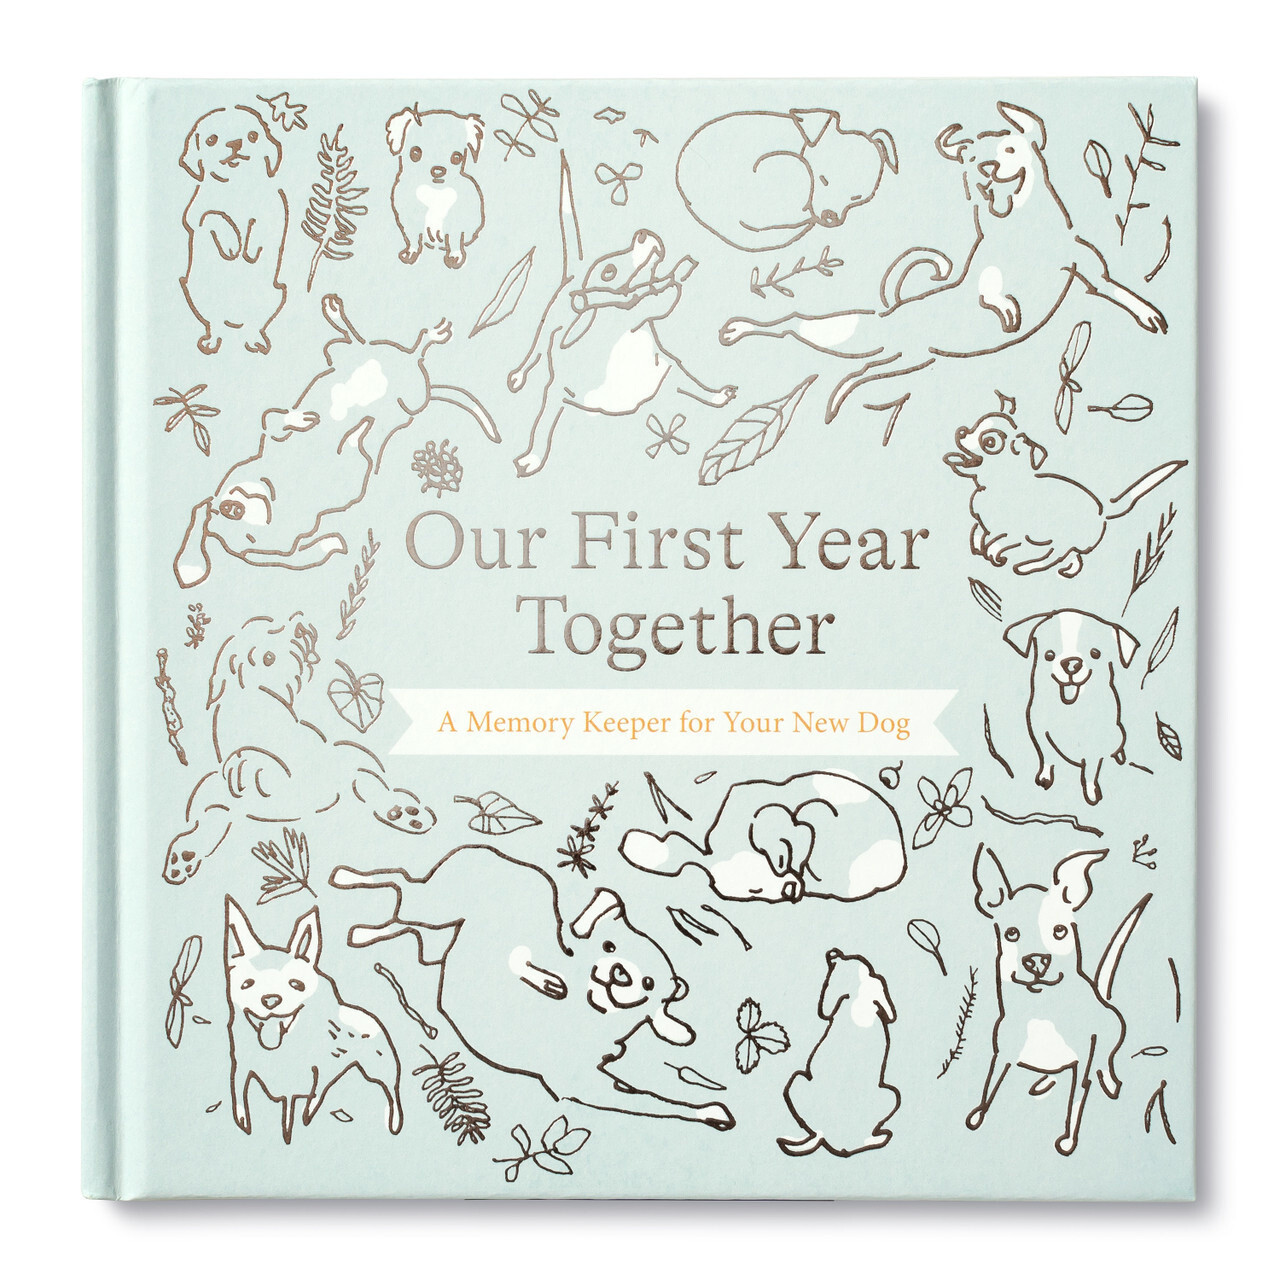 Dog Keepsake: Our First Year Together